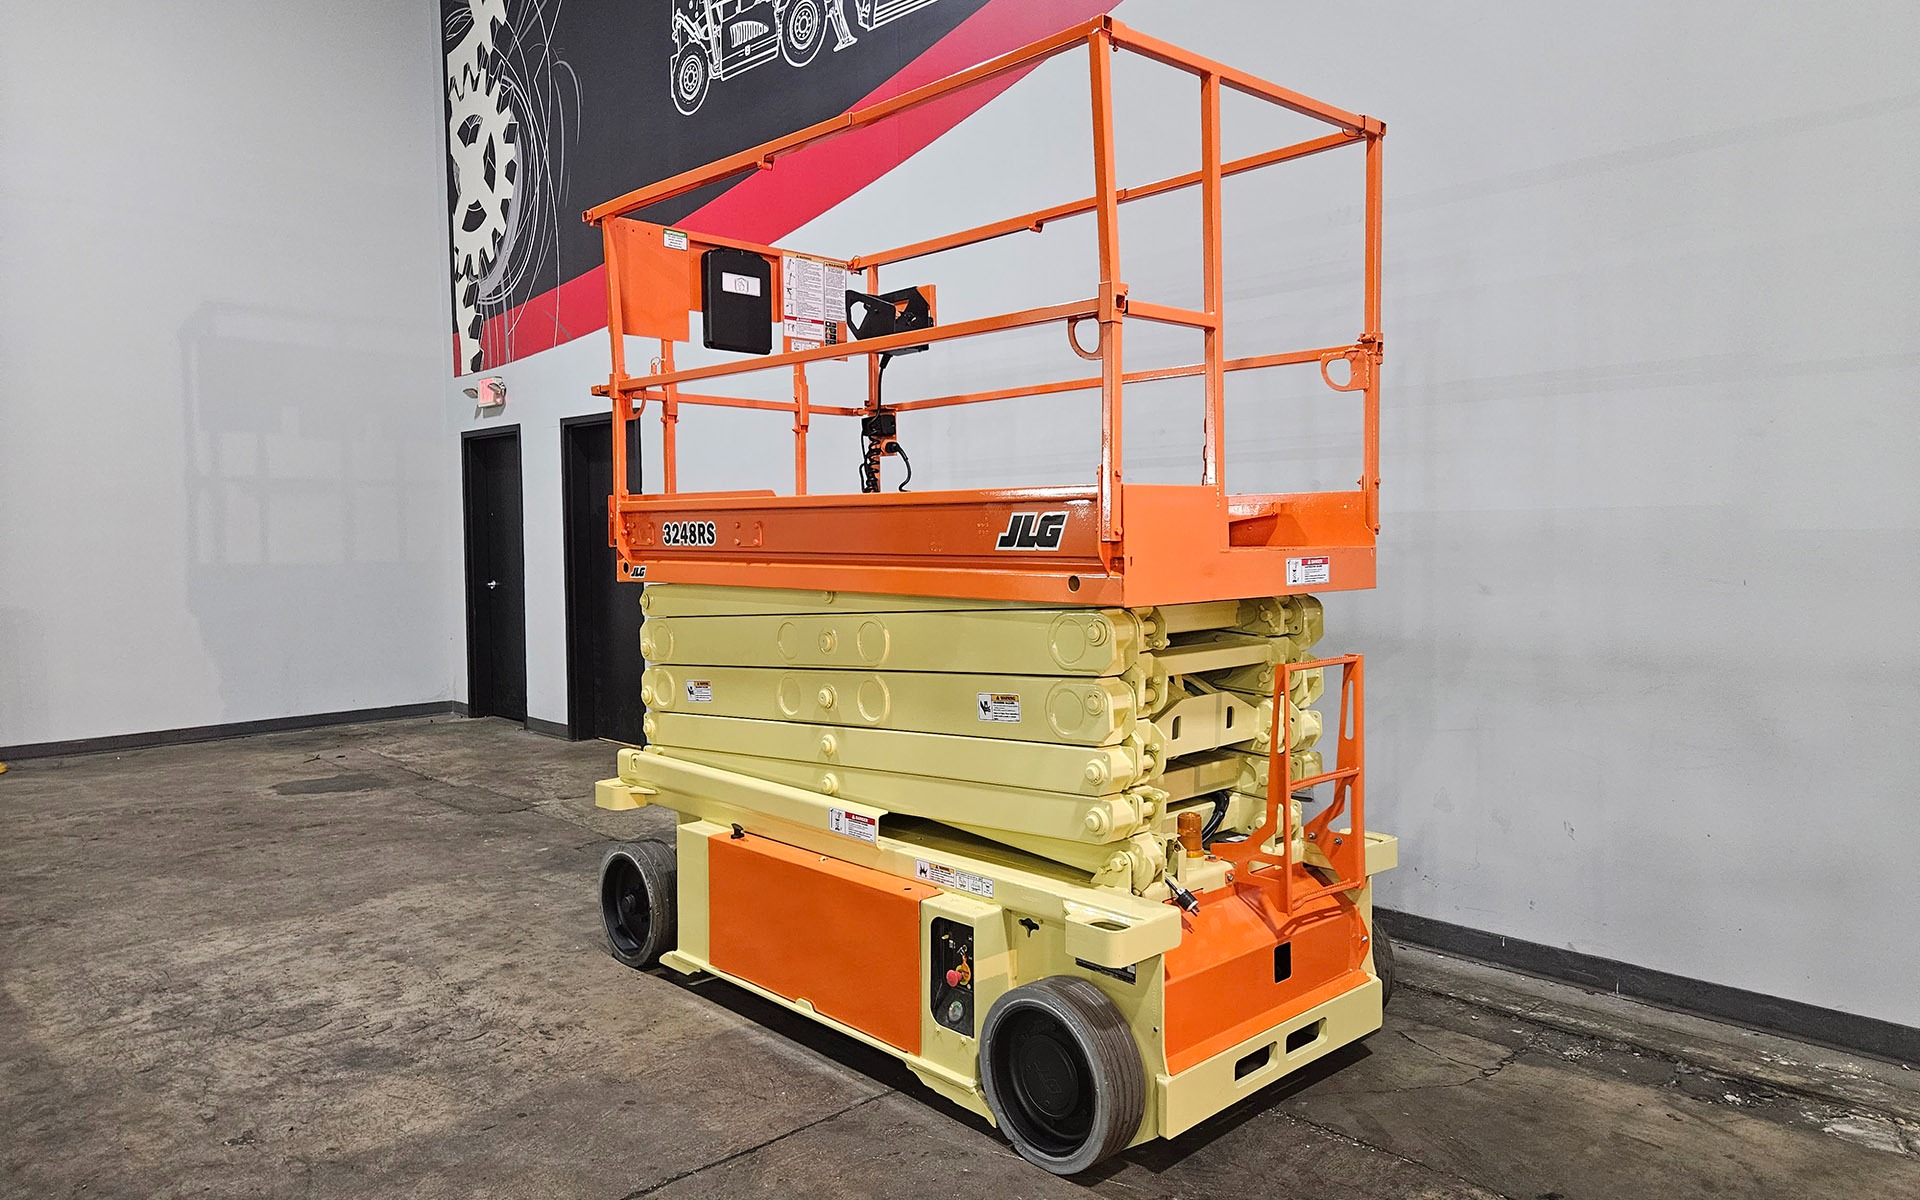 Used 2014 JLG 3248RS  | Cary, IL